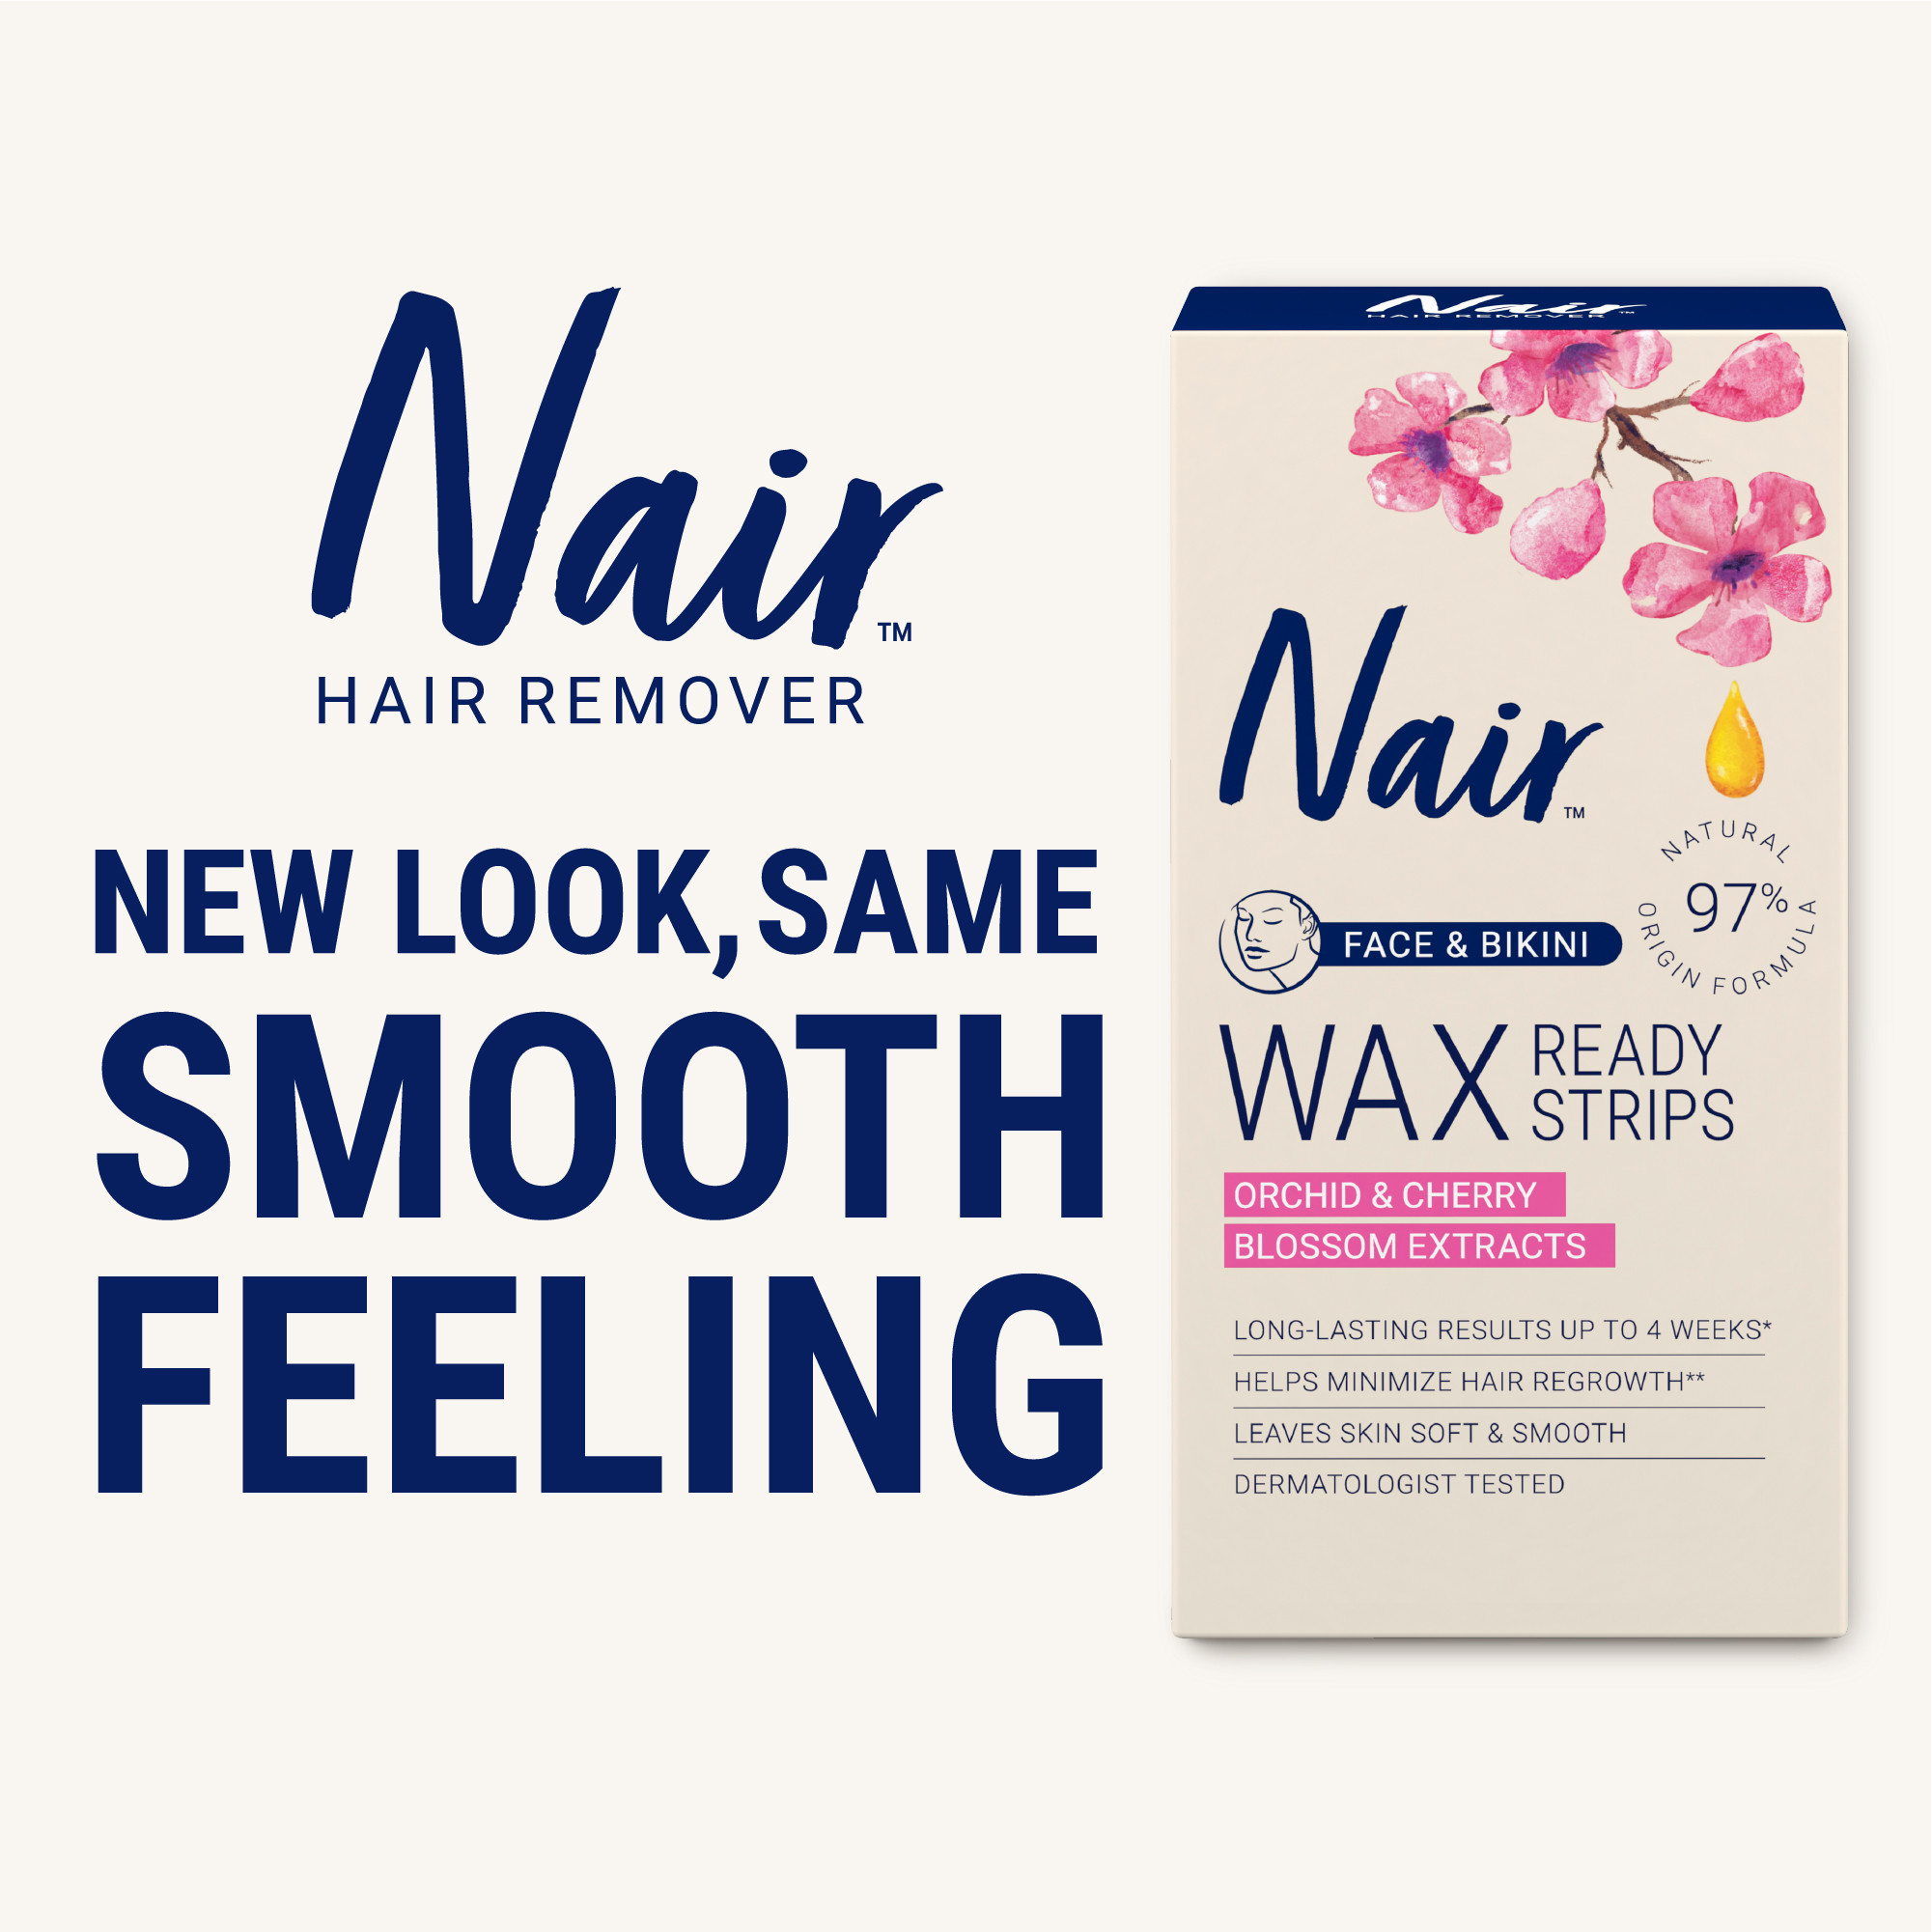 Nair Hair Remover Wax Ready Strips, Face and Bikini Hair Removal Wax Strips, 40 Count - image 4 of 12